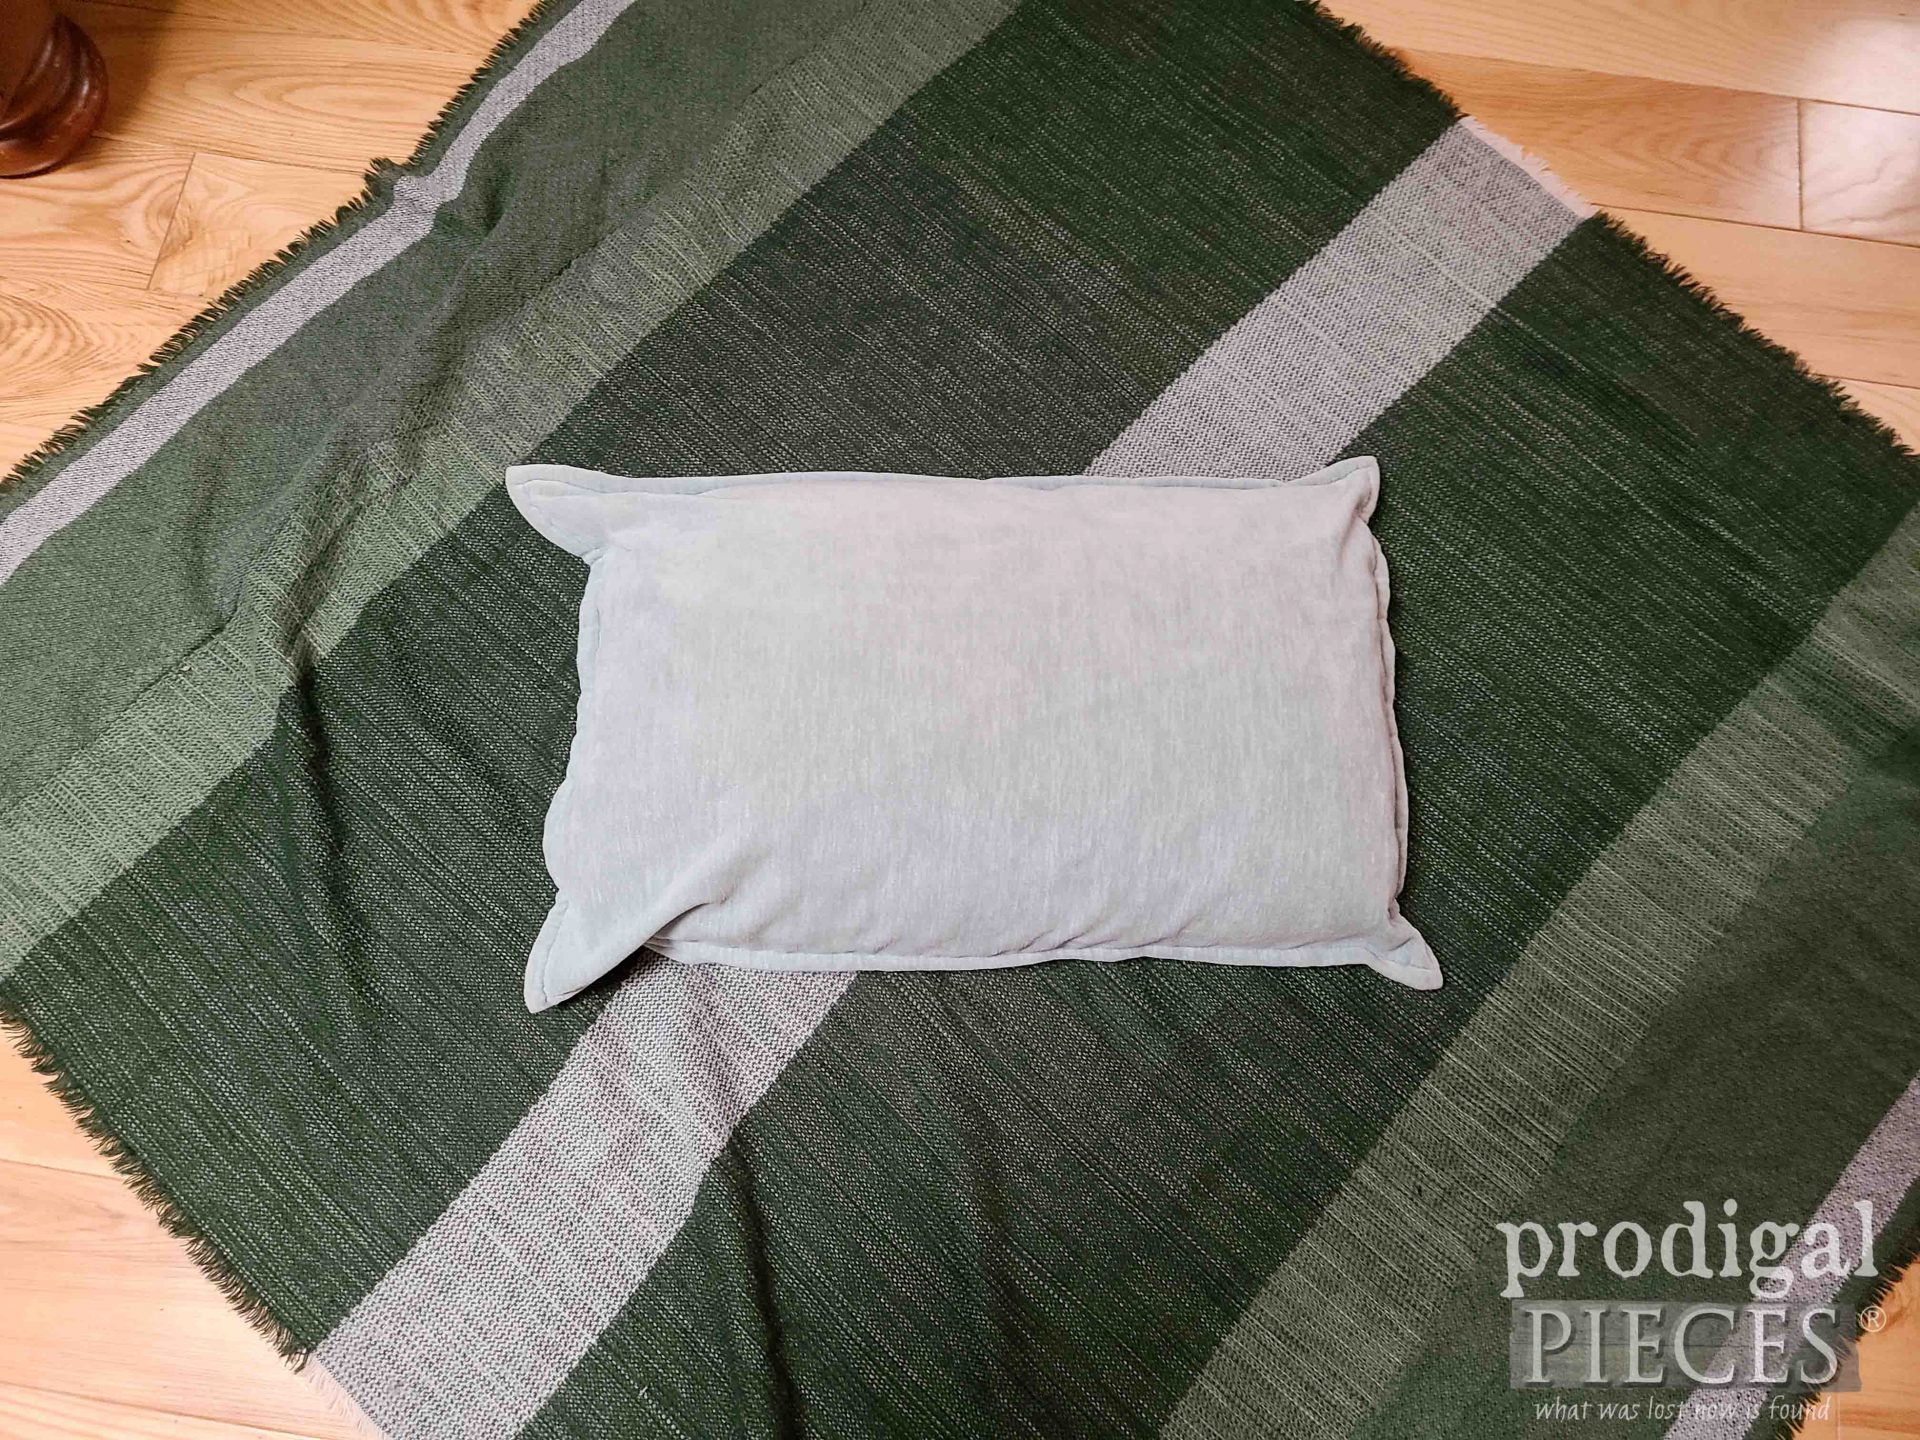 Wrapping Pillow with Upcycled Scarves for Decor | prodigalpieces.com